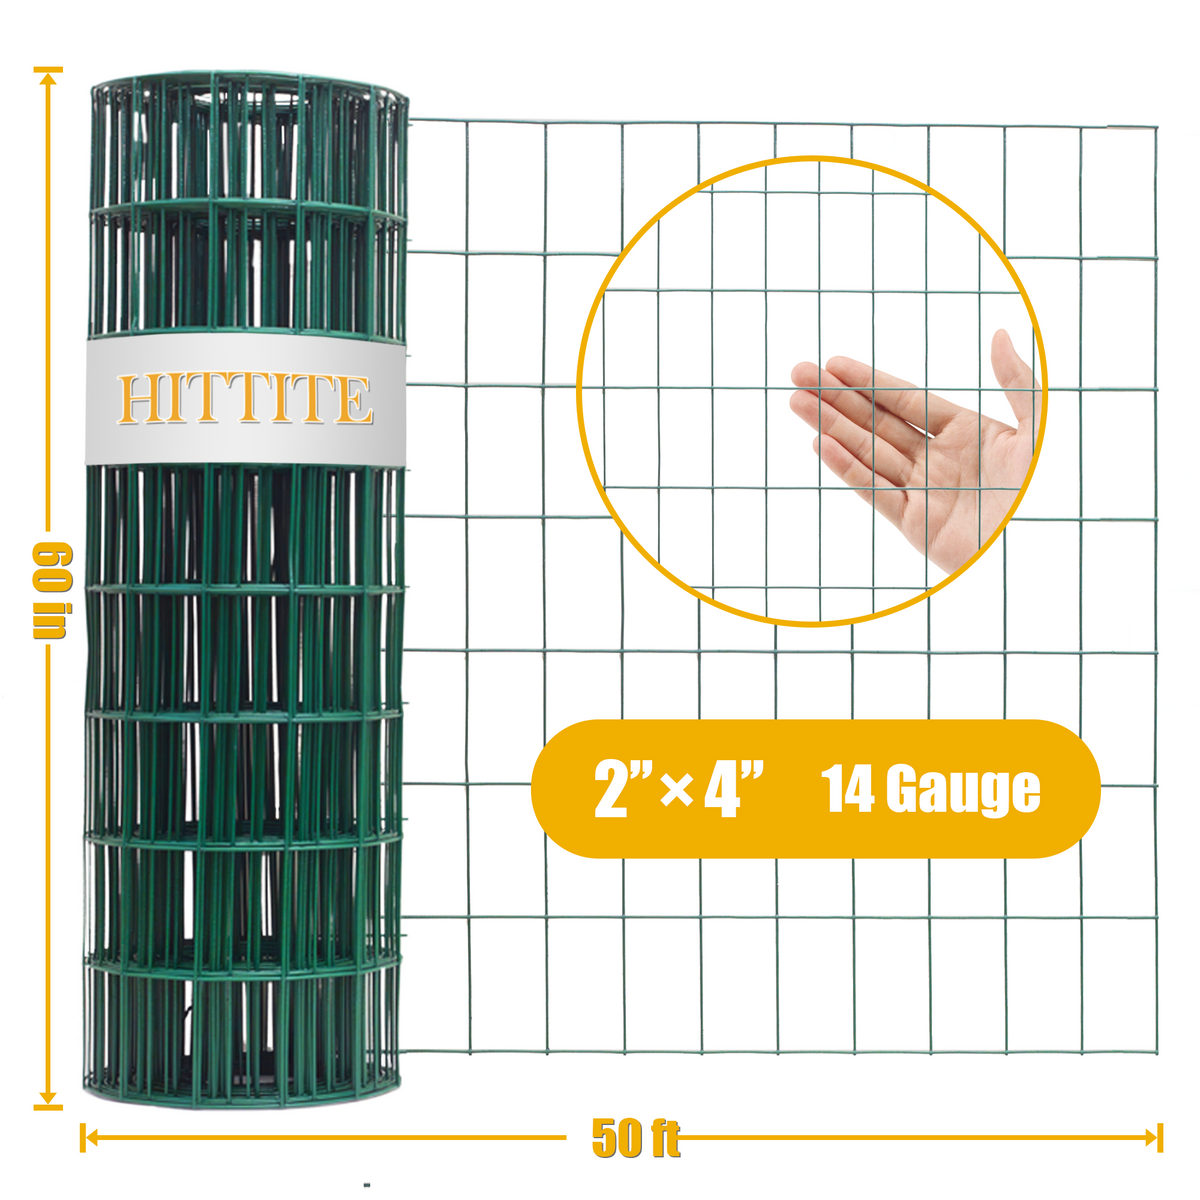 HITTITE Green PVC Coated Welded Wire Fencing, 60in x 50ft, 2 inch x 4 inch 14 GA Welded Wire Fence Rolls, Black Metal Garden Fence Wire Roll Garden Border Fencing for Yard Vegetable Plant Protection